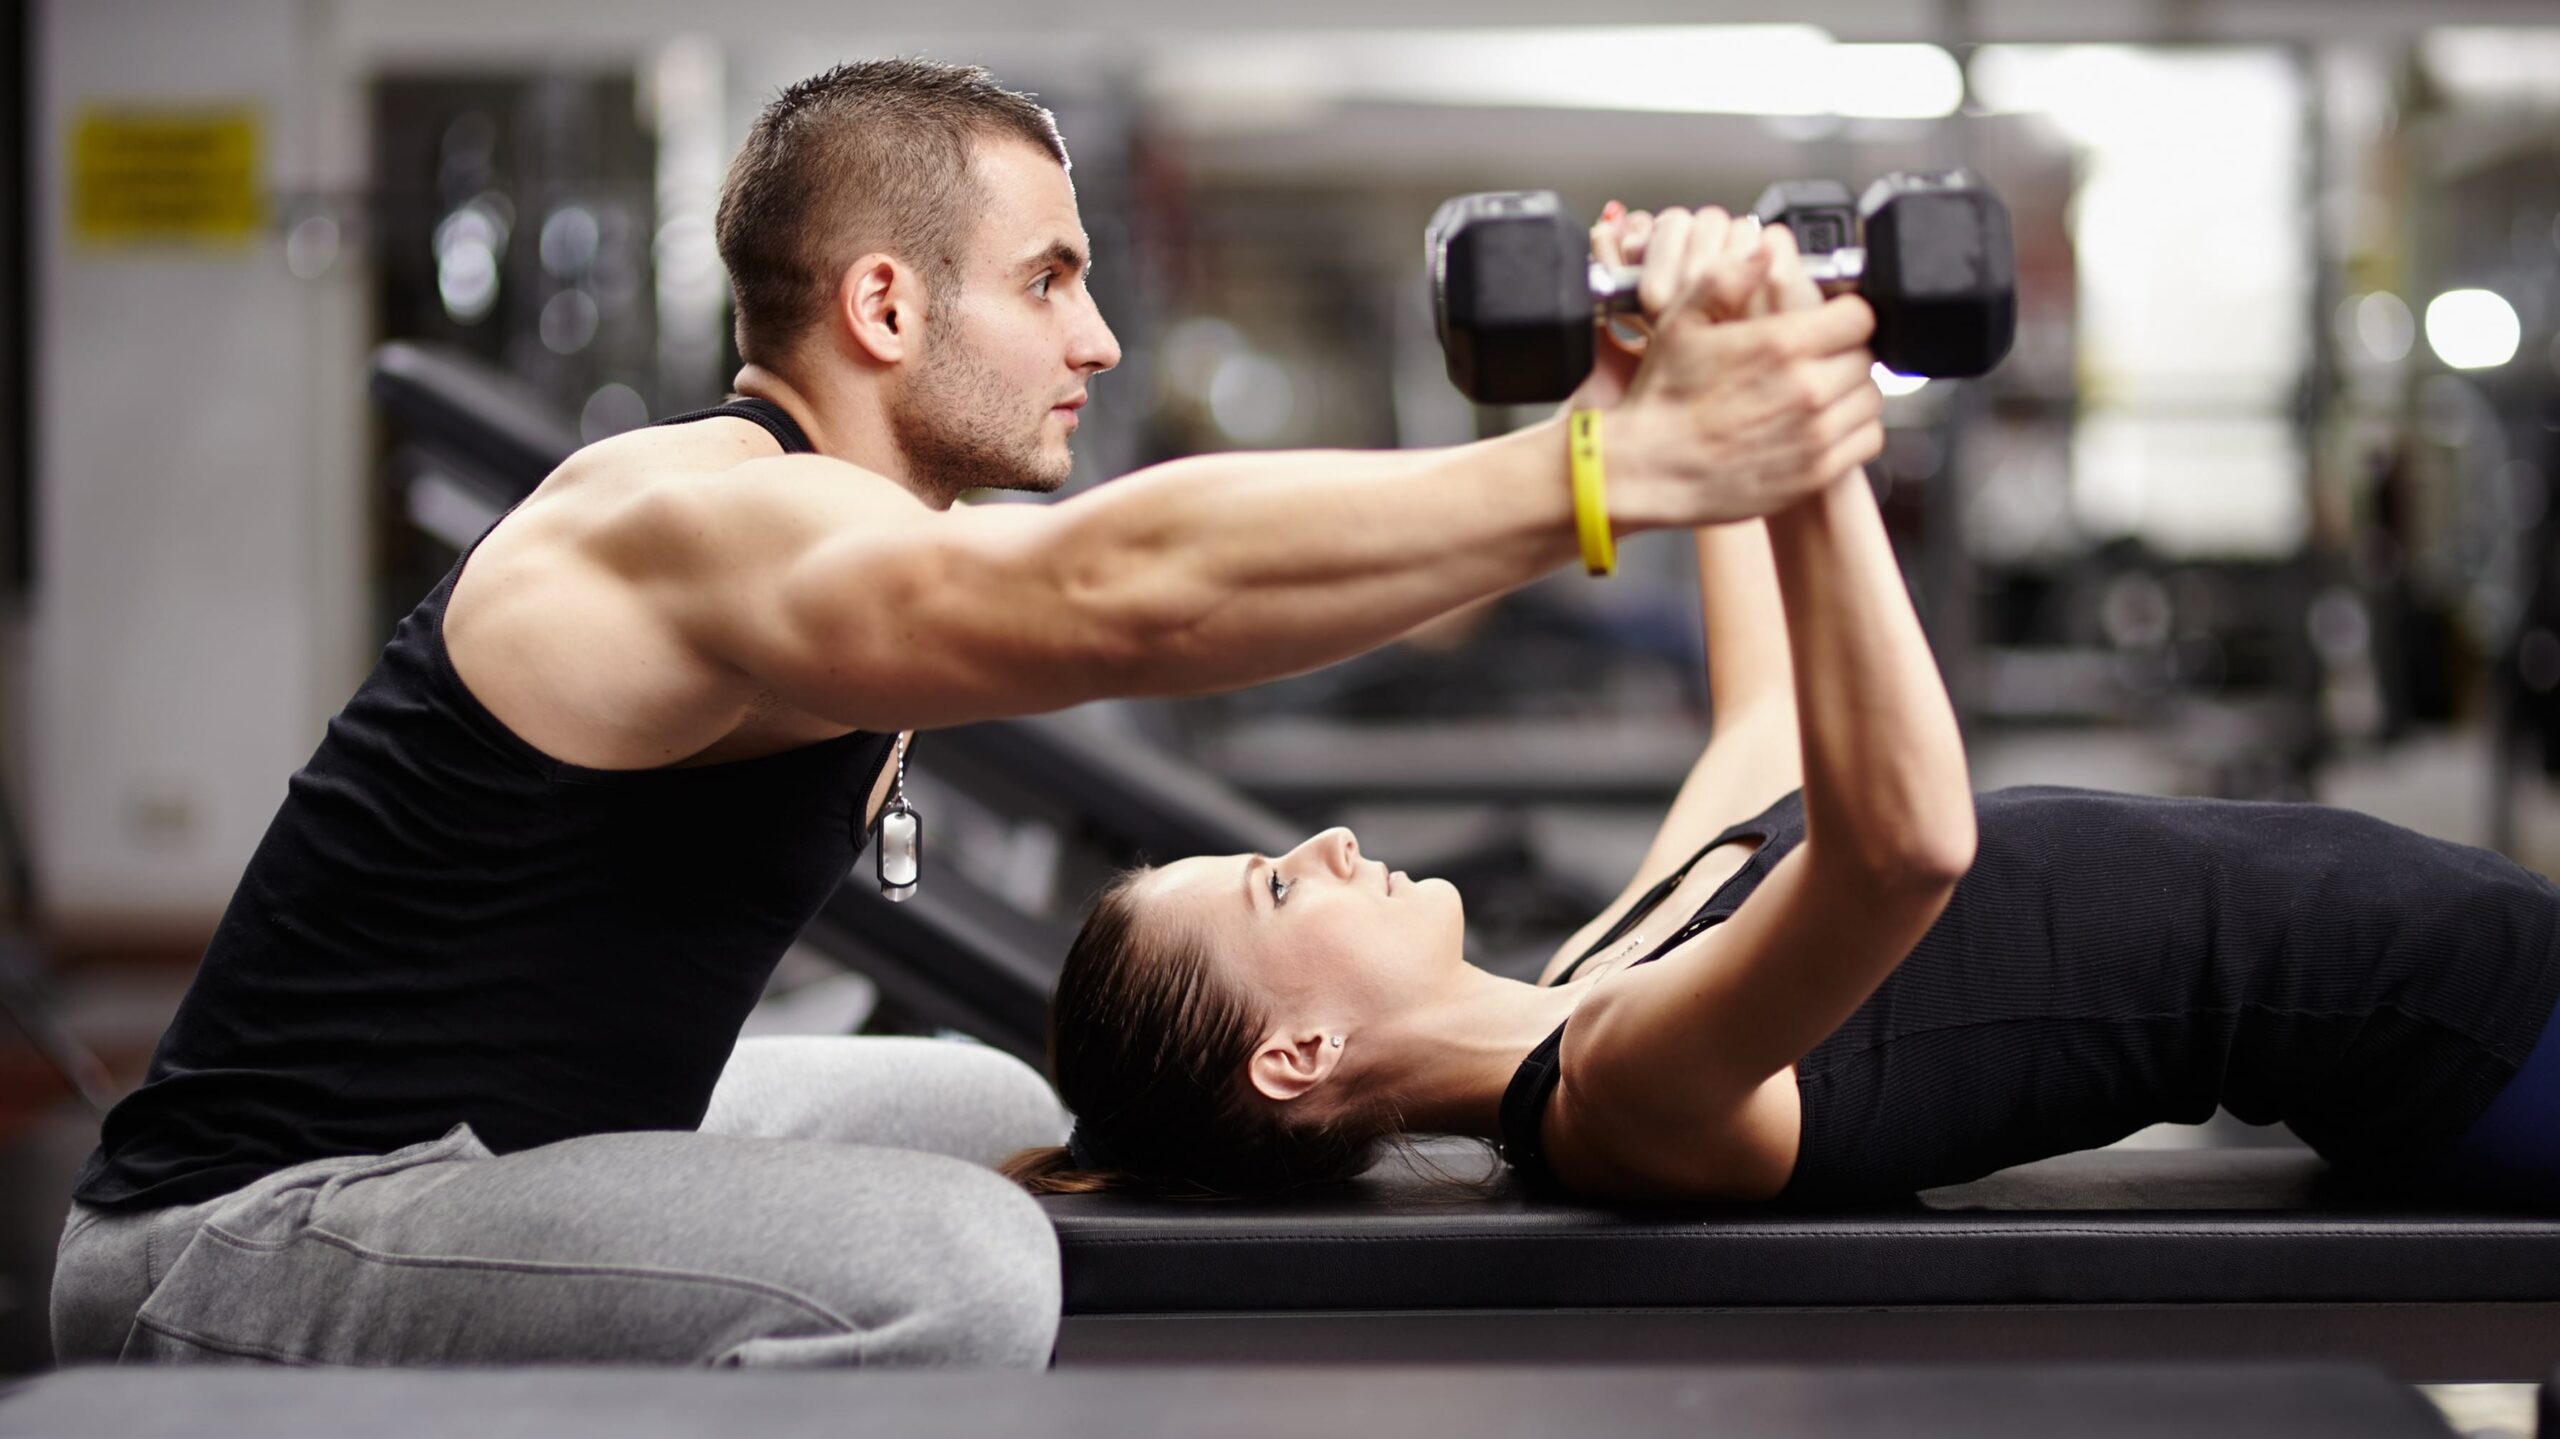 personal trainer per donne in palestra